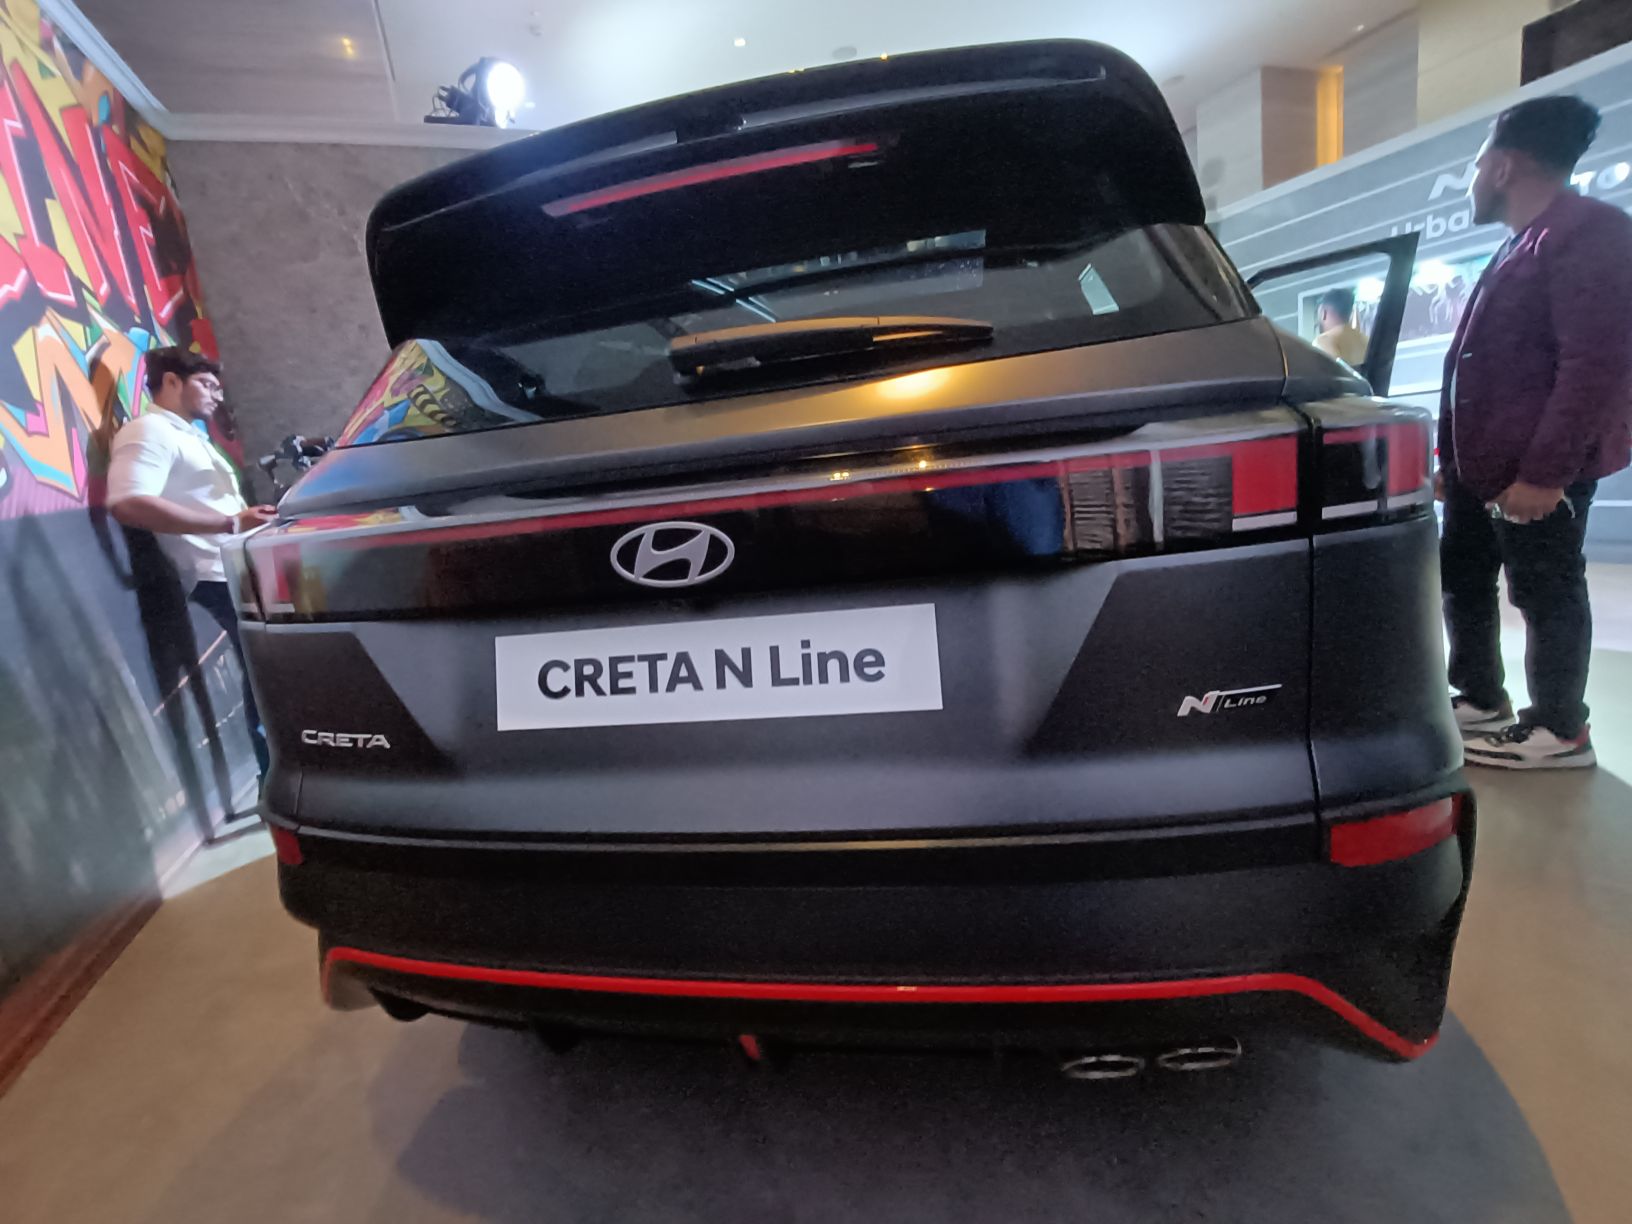 Hyundai Creta N Line Launched In India At Rs 16.8 Lakh — Check Images